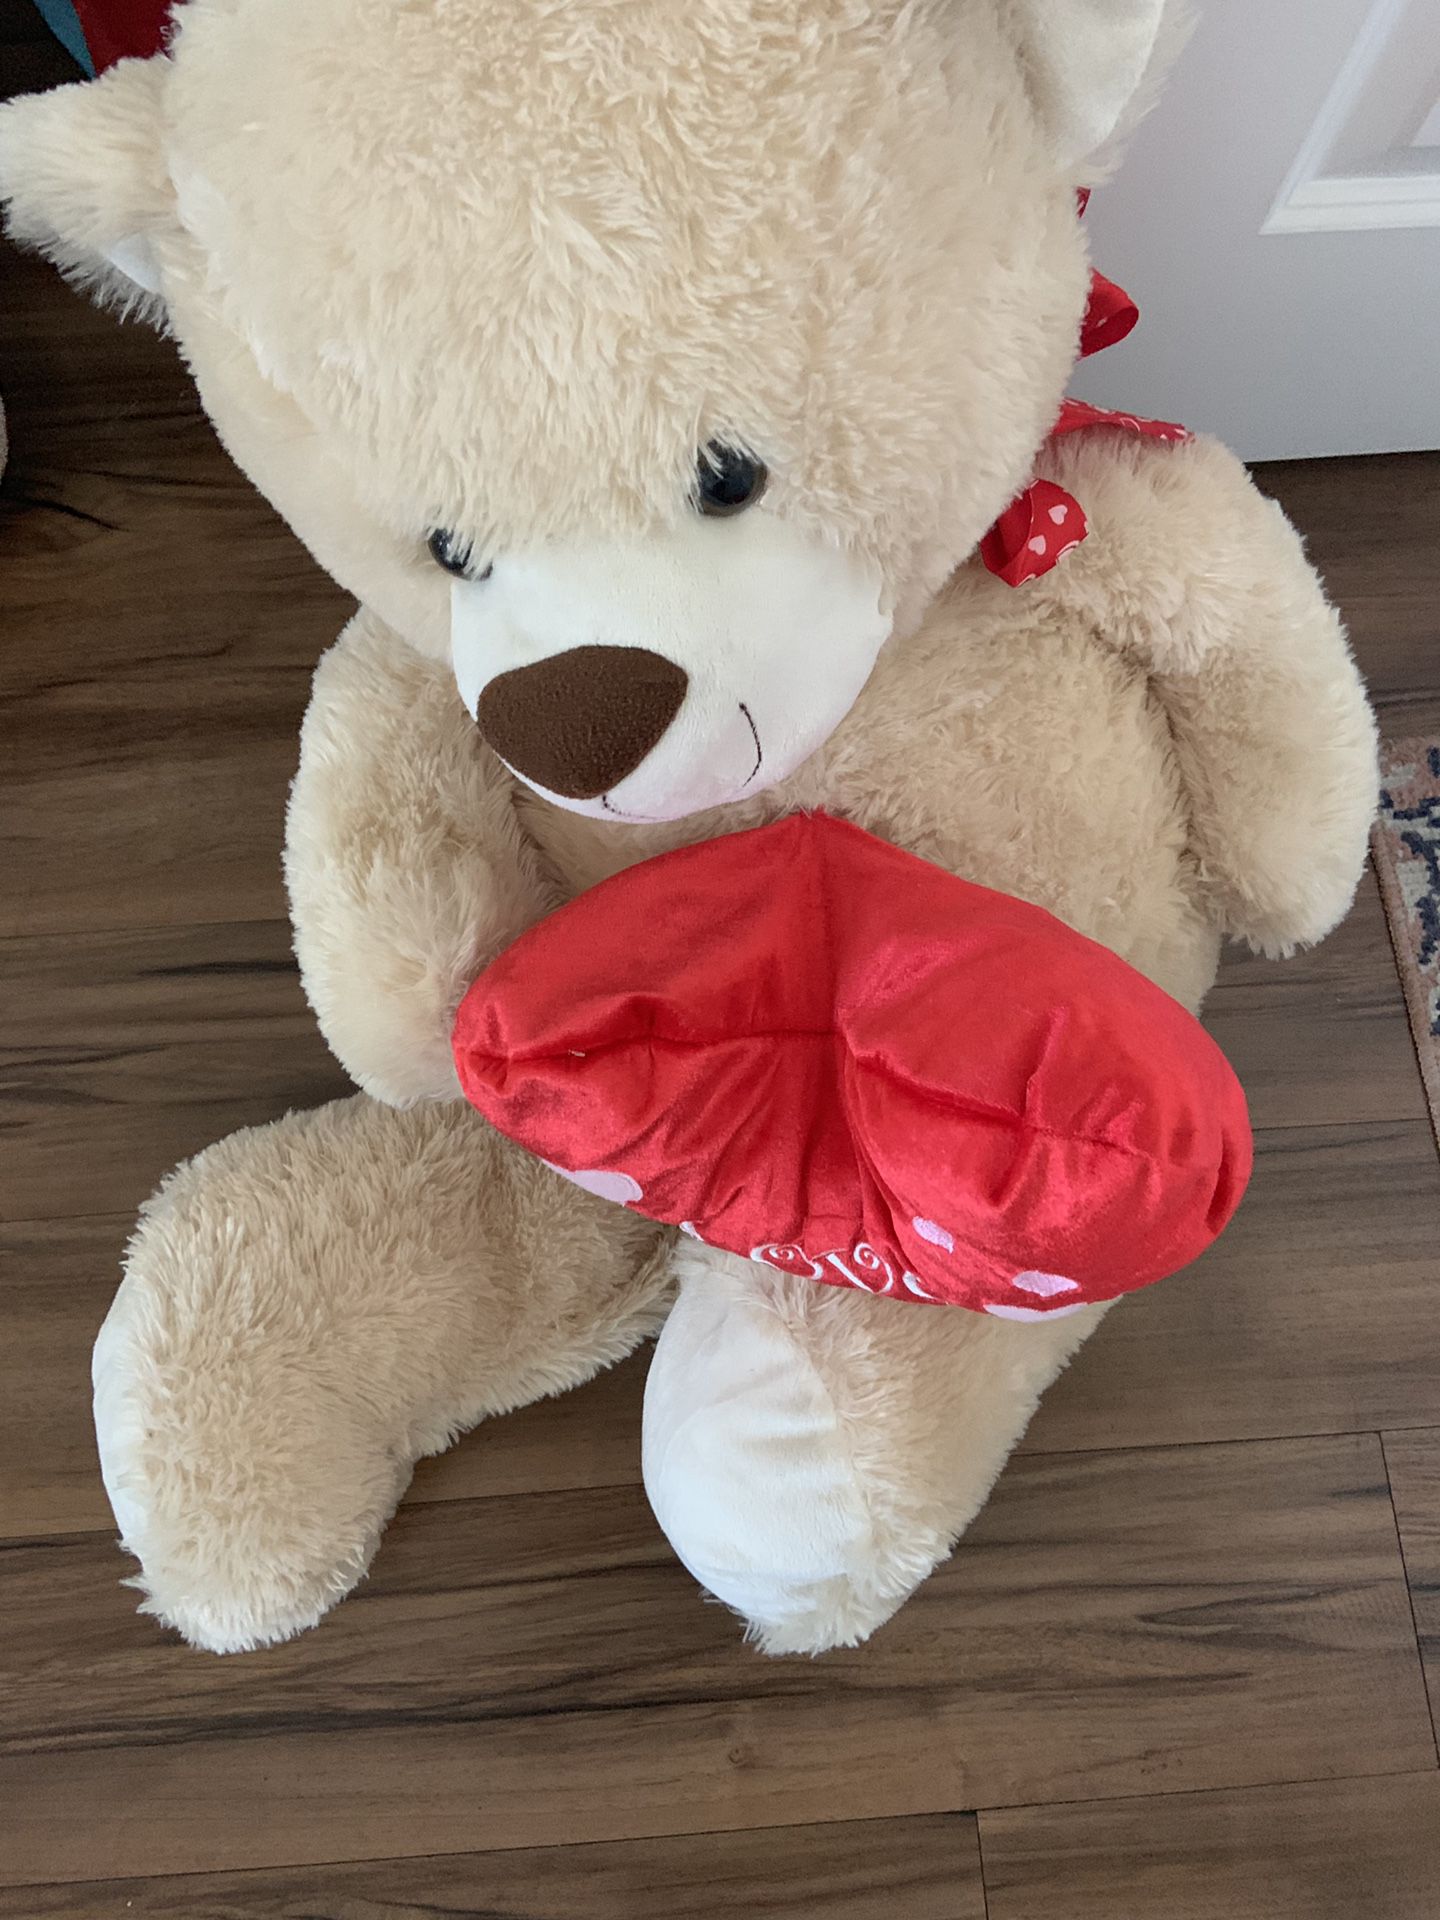 plush tan teddy bear holding a red heart that says "I Love You."